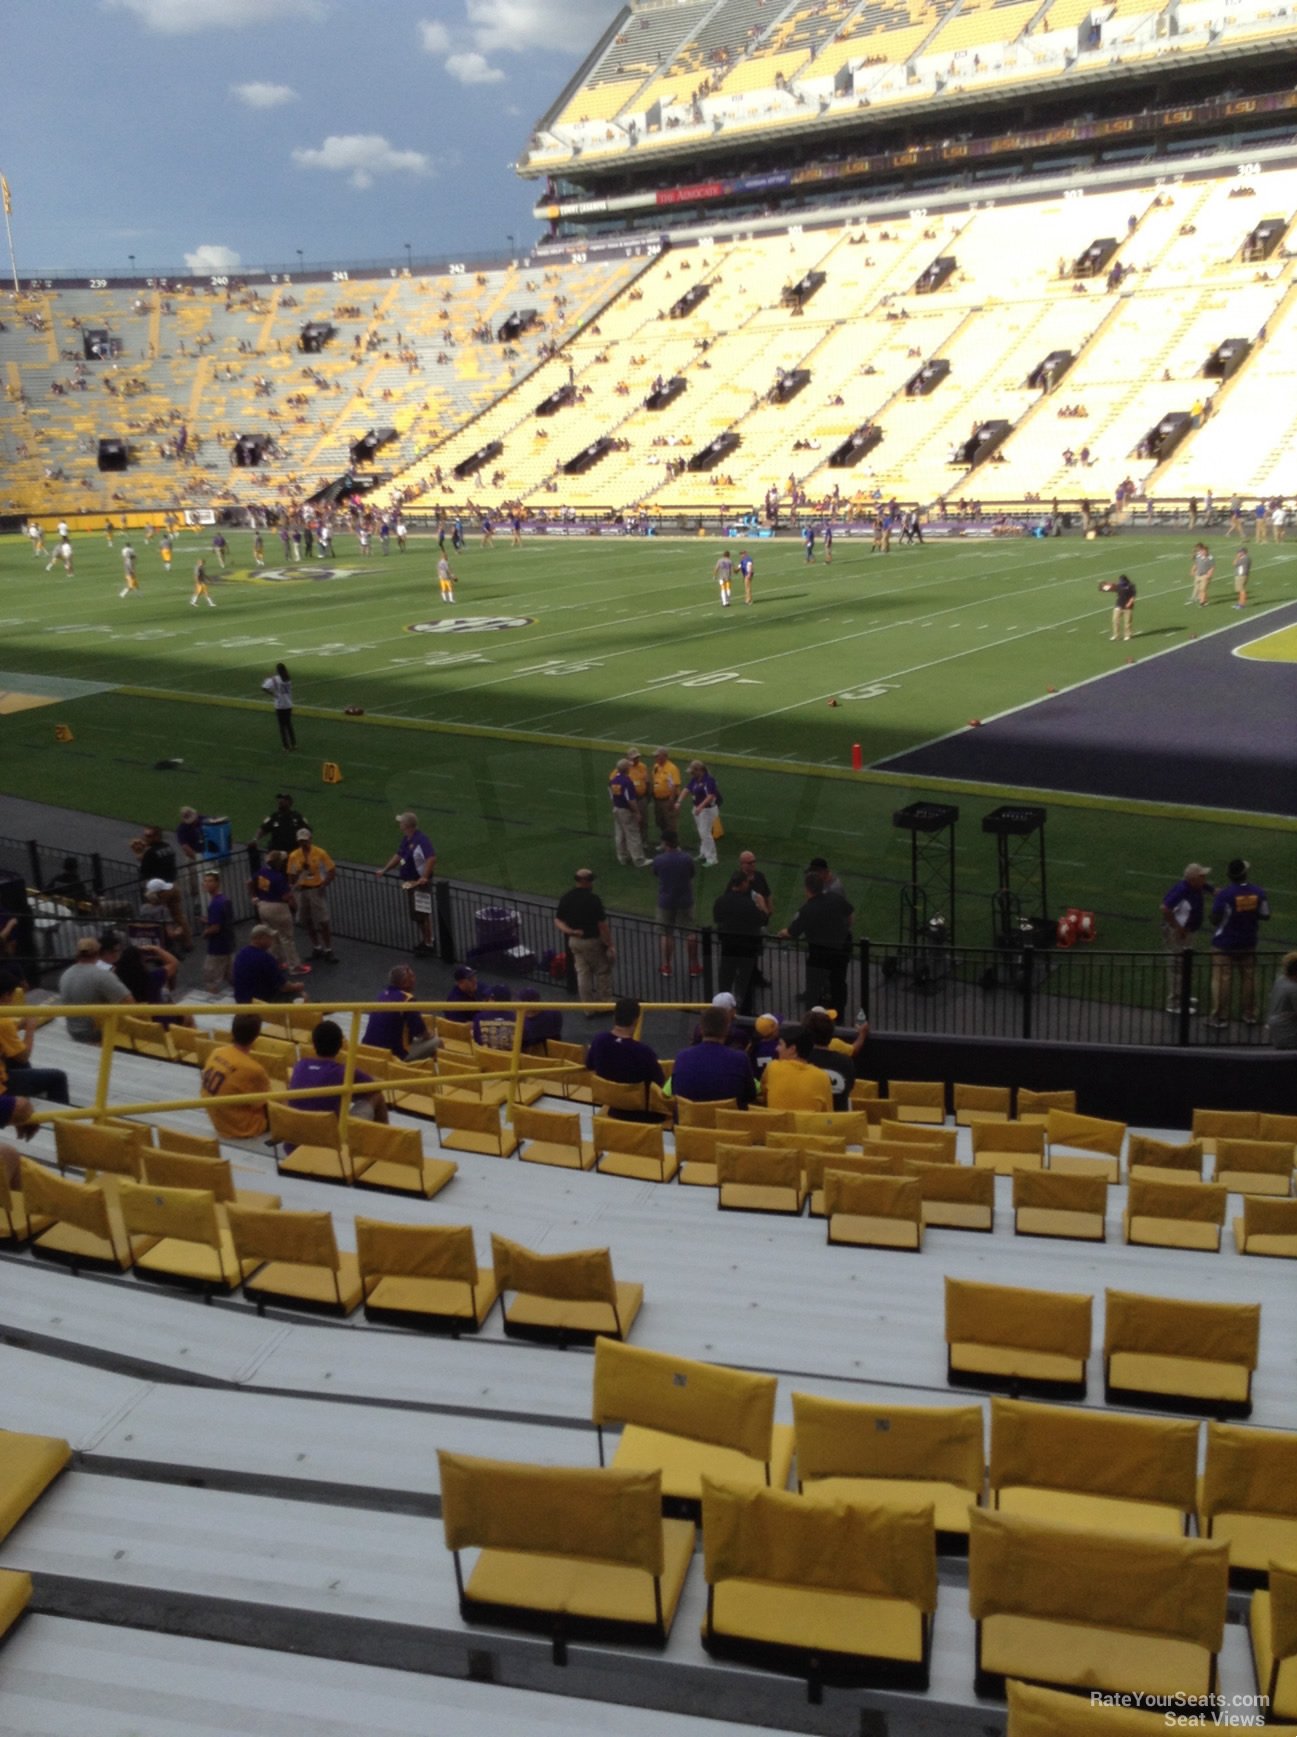 Tiger Stadium Seating Chart With Rows